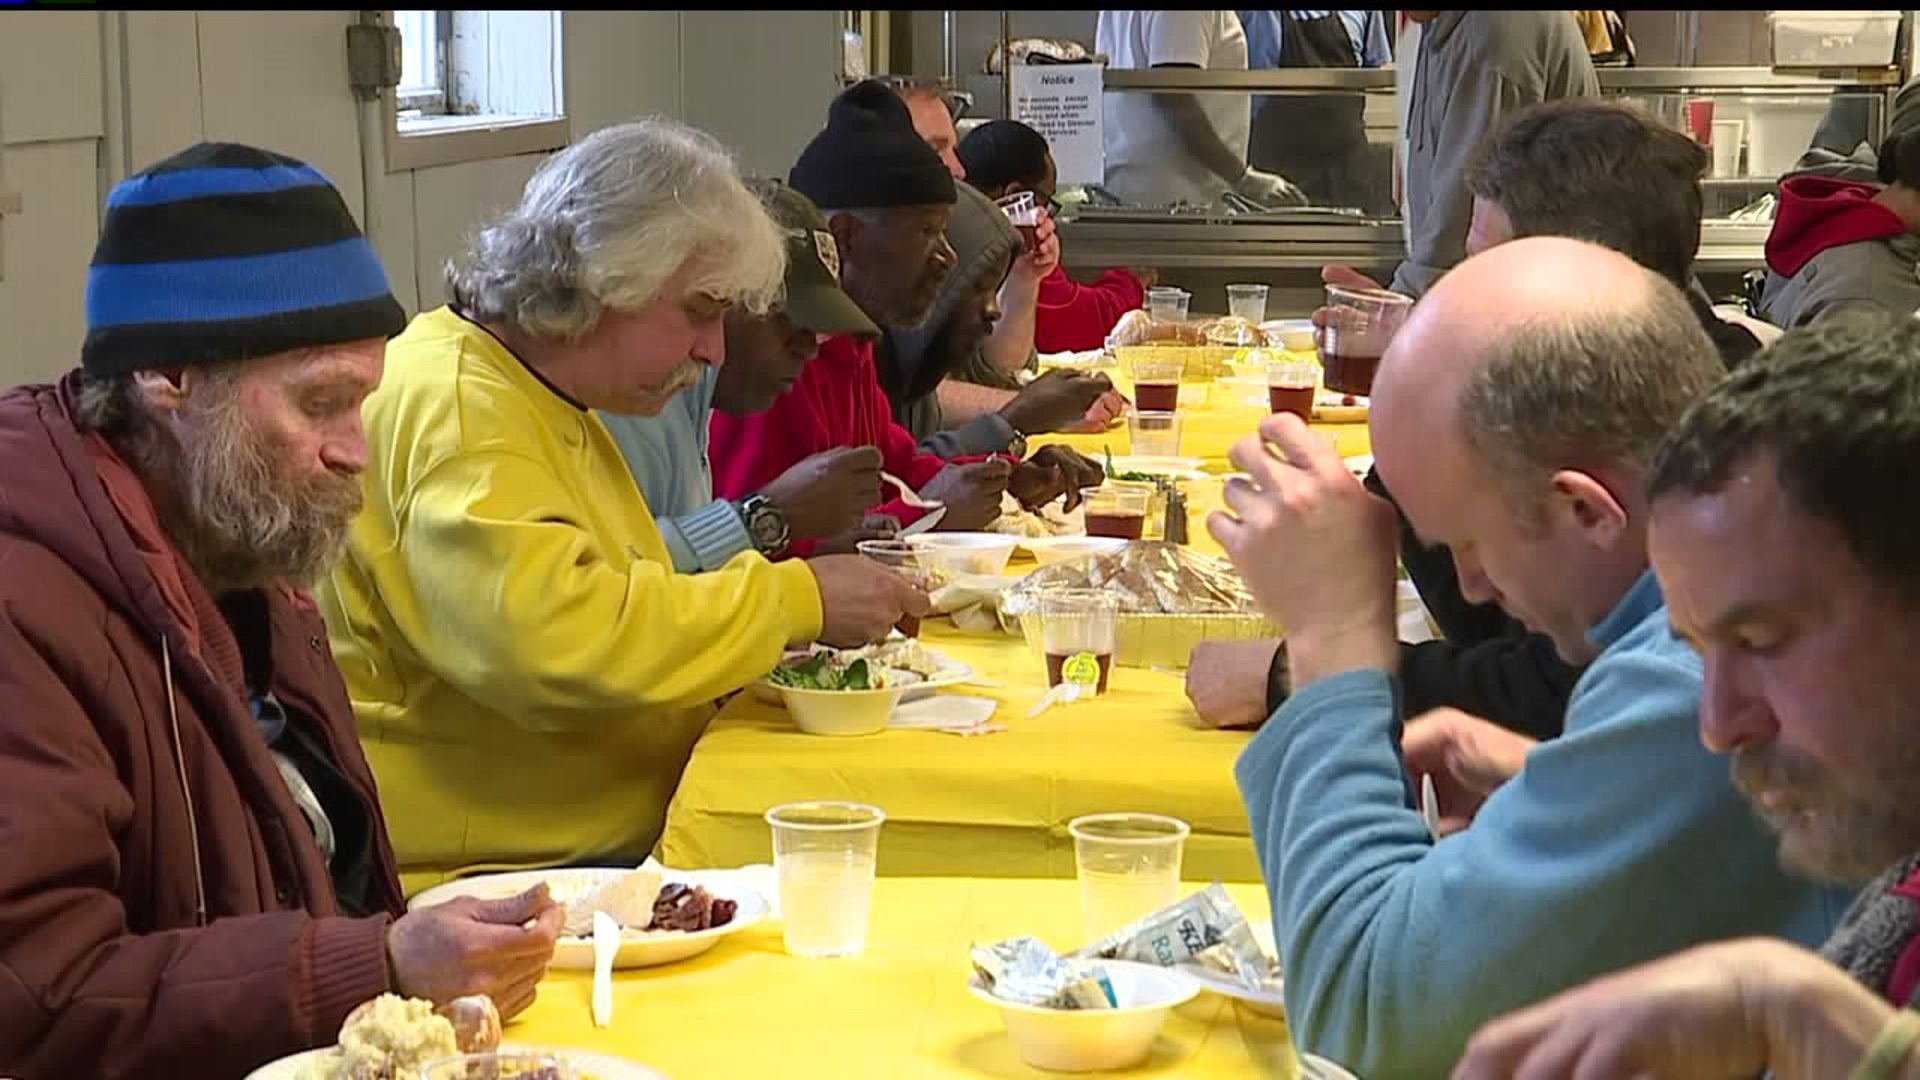 Bethesda Mission hosts annual Easter dinner